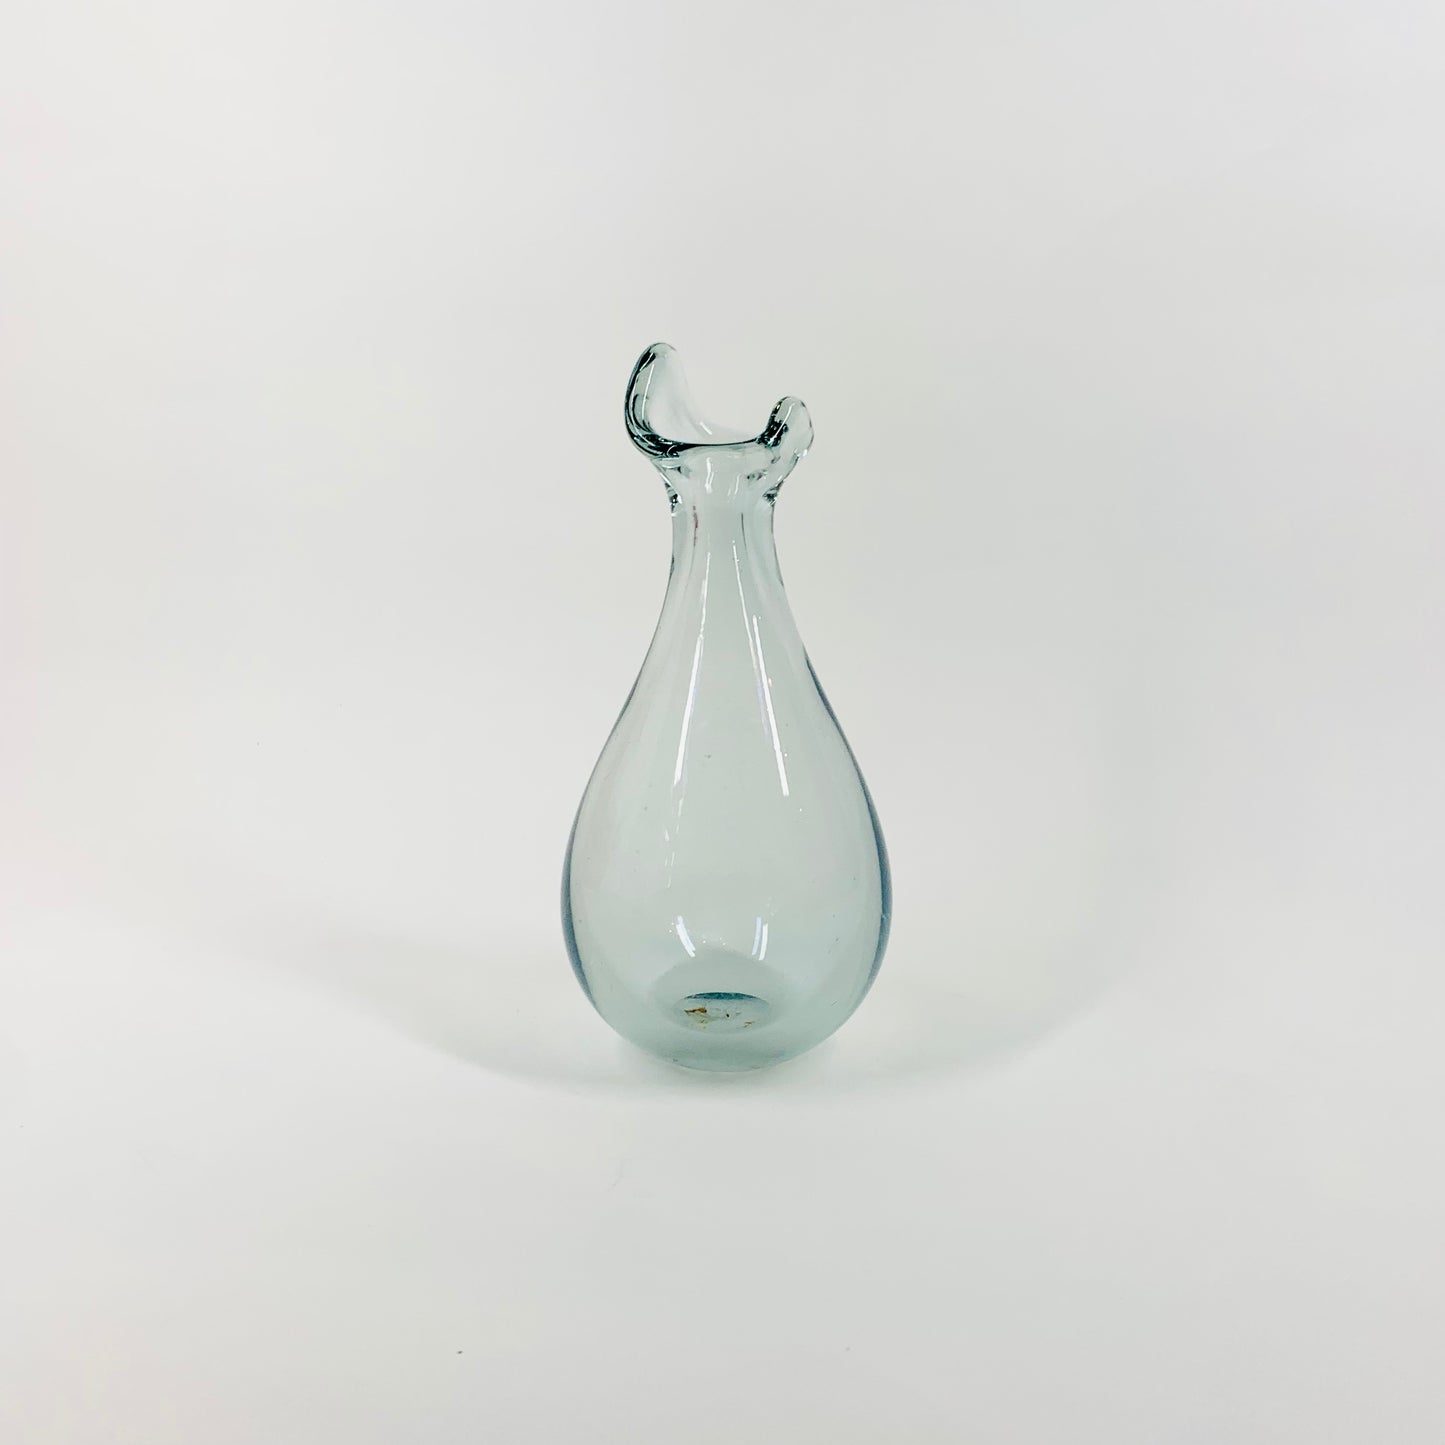 Rare 1960s Holmegaard small pinched bill glass vase by Per Lutken